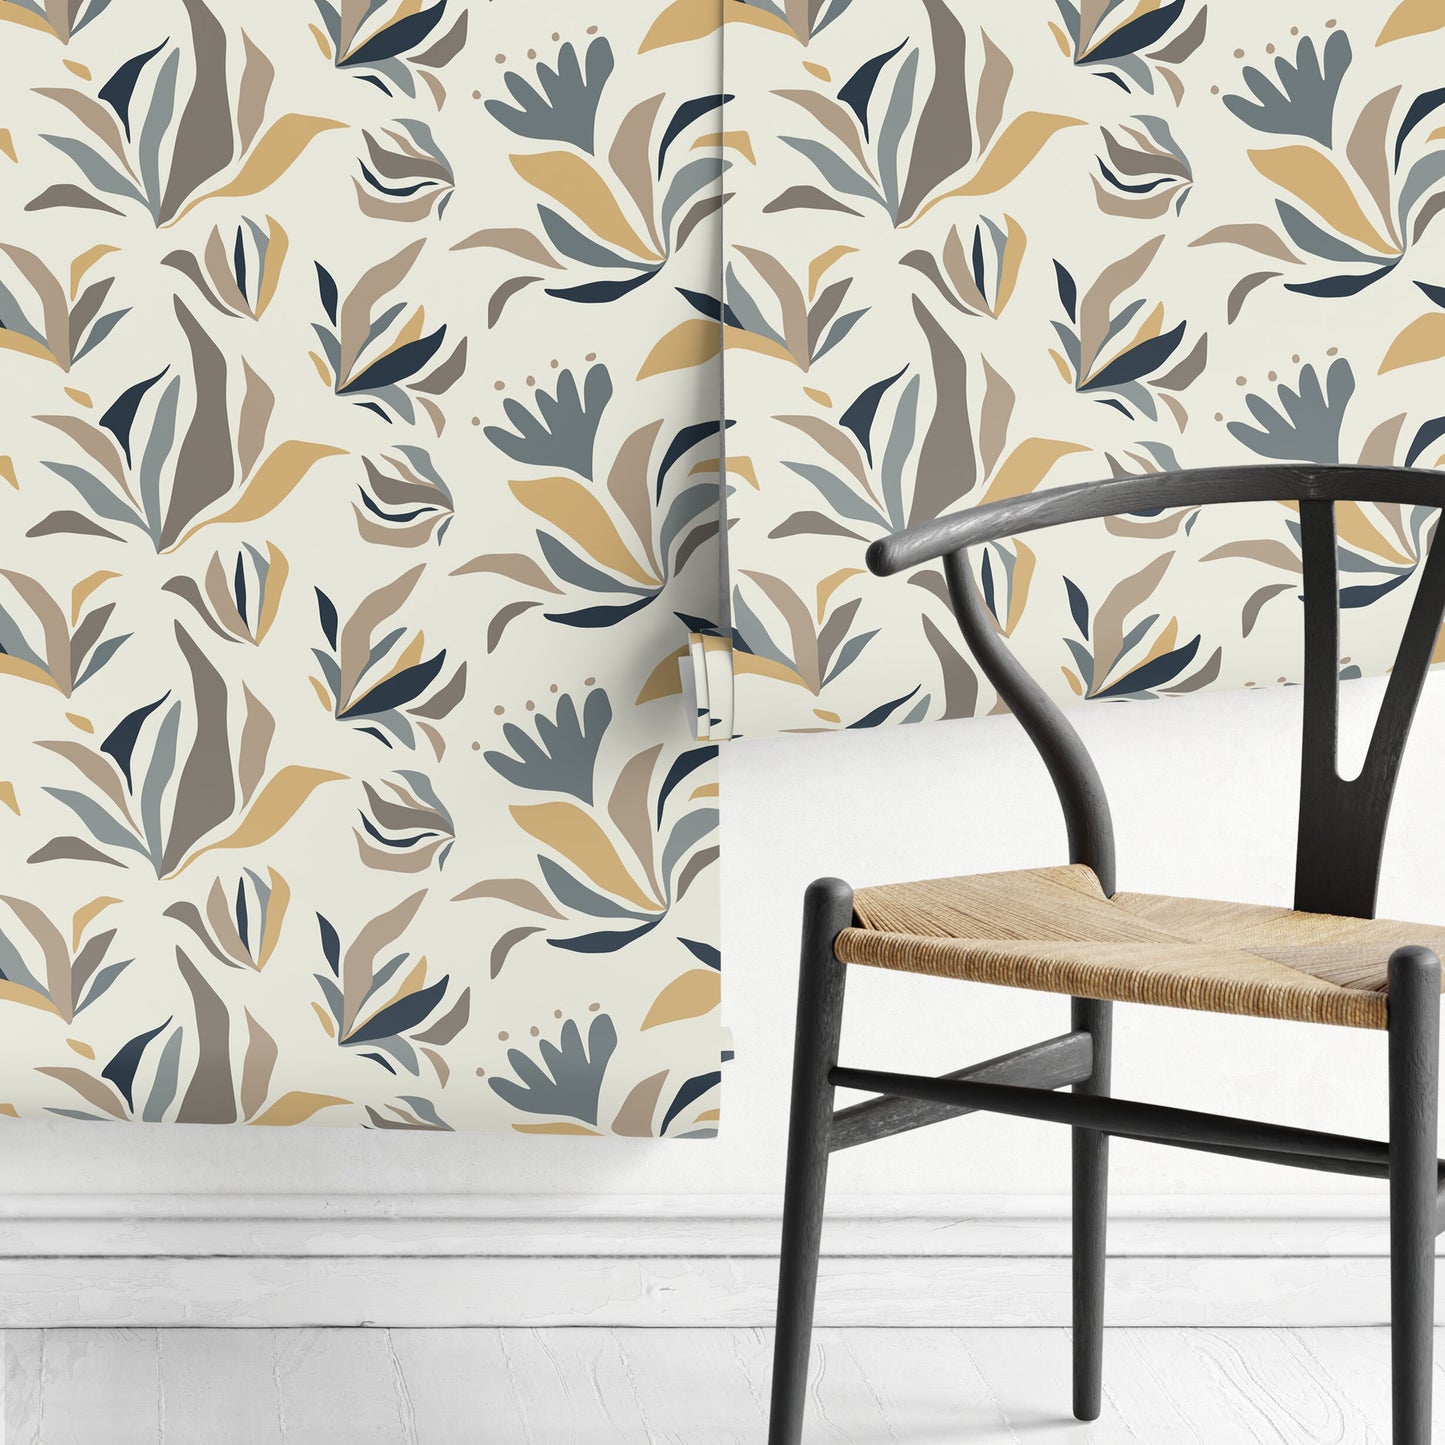 Abstract Floral and Leaf Wallpaper Modern Wallpaper Peel and Stick and Traditional Wallpaper - D725